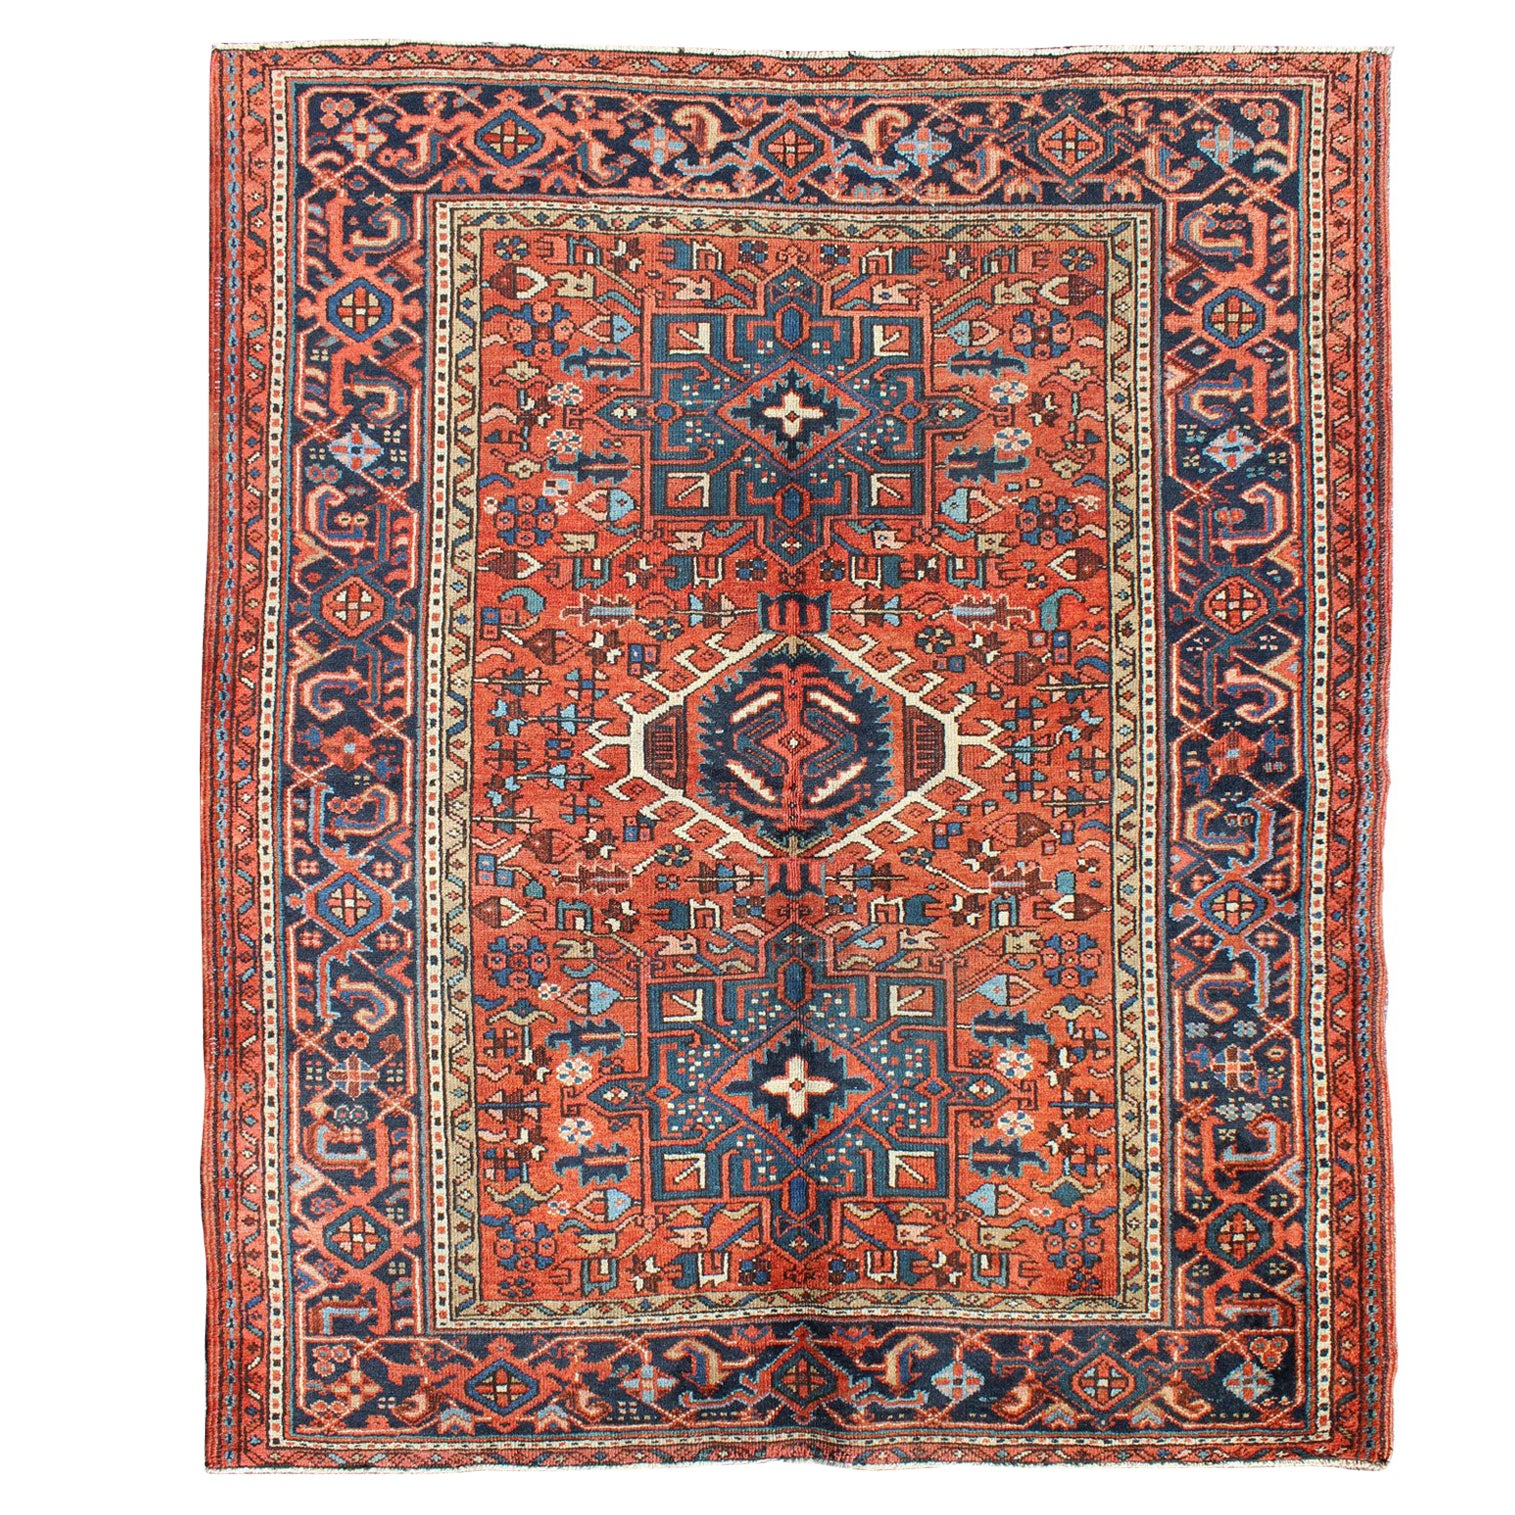 Antique Persian Karajeh Rug with Three Geometric Medallions in Rust & Blue